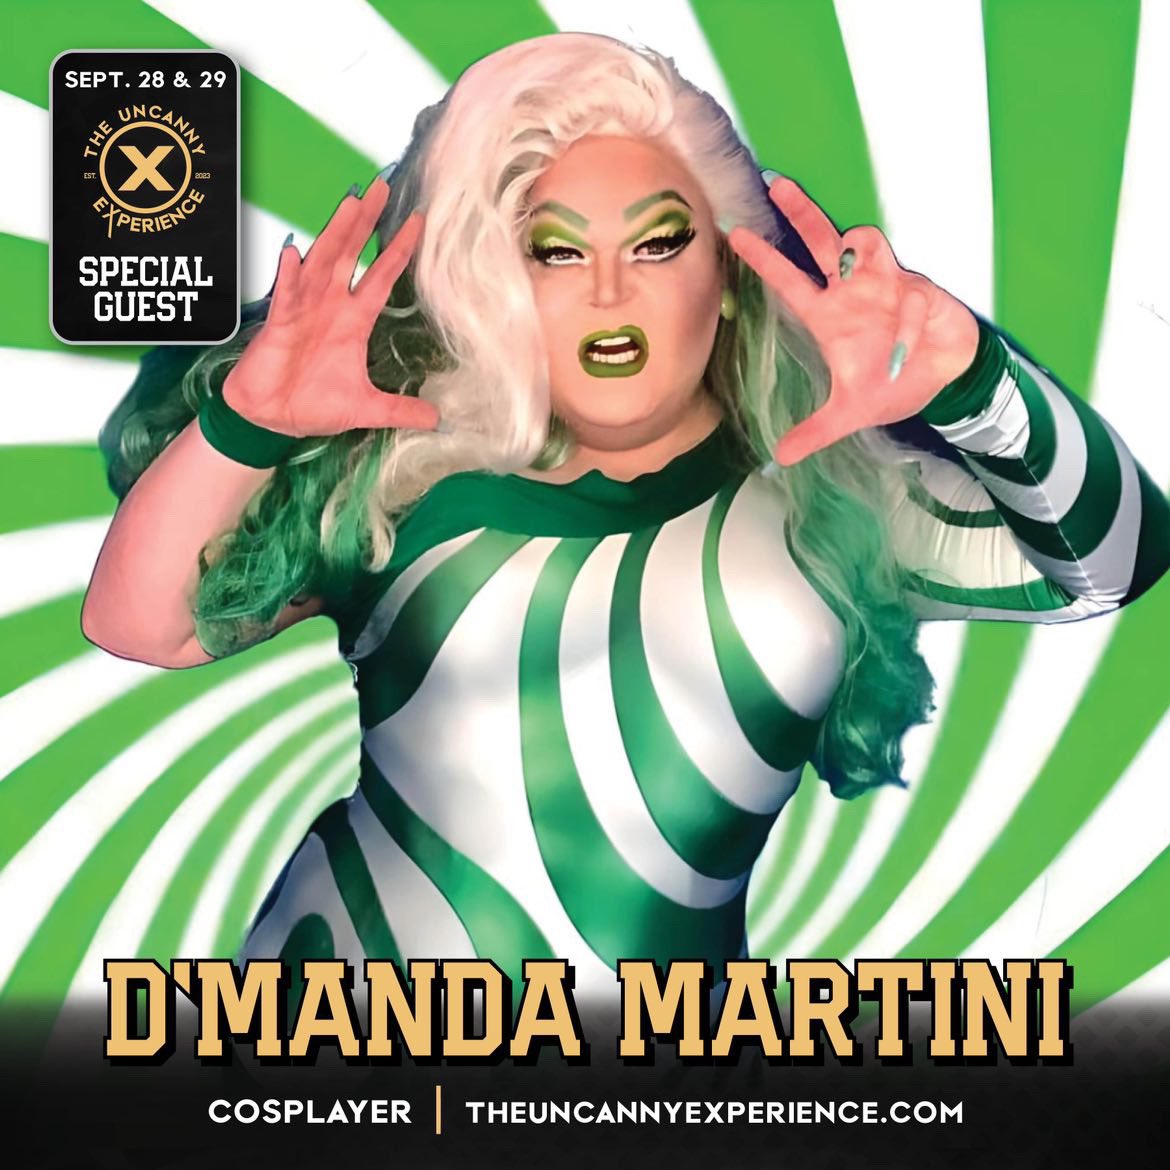 So excited to announce I’ll be coming to @TheUncannyEXP this September as VERTIGO and will be doing a special performance (more details to come) - I’ll see y’all there in September!! #theuncannyexperience #cosplayguest #dragqueen #vertigo #xmen